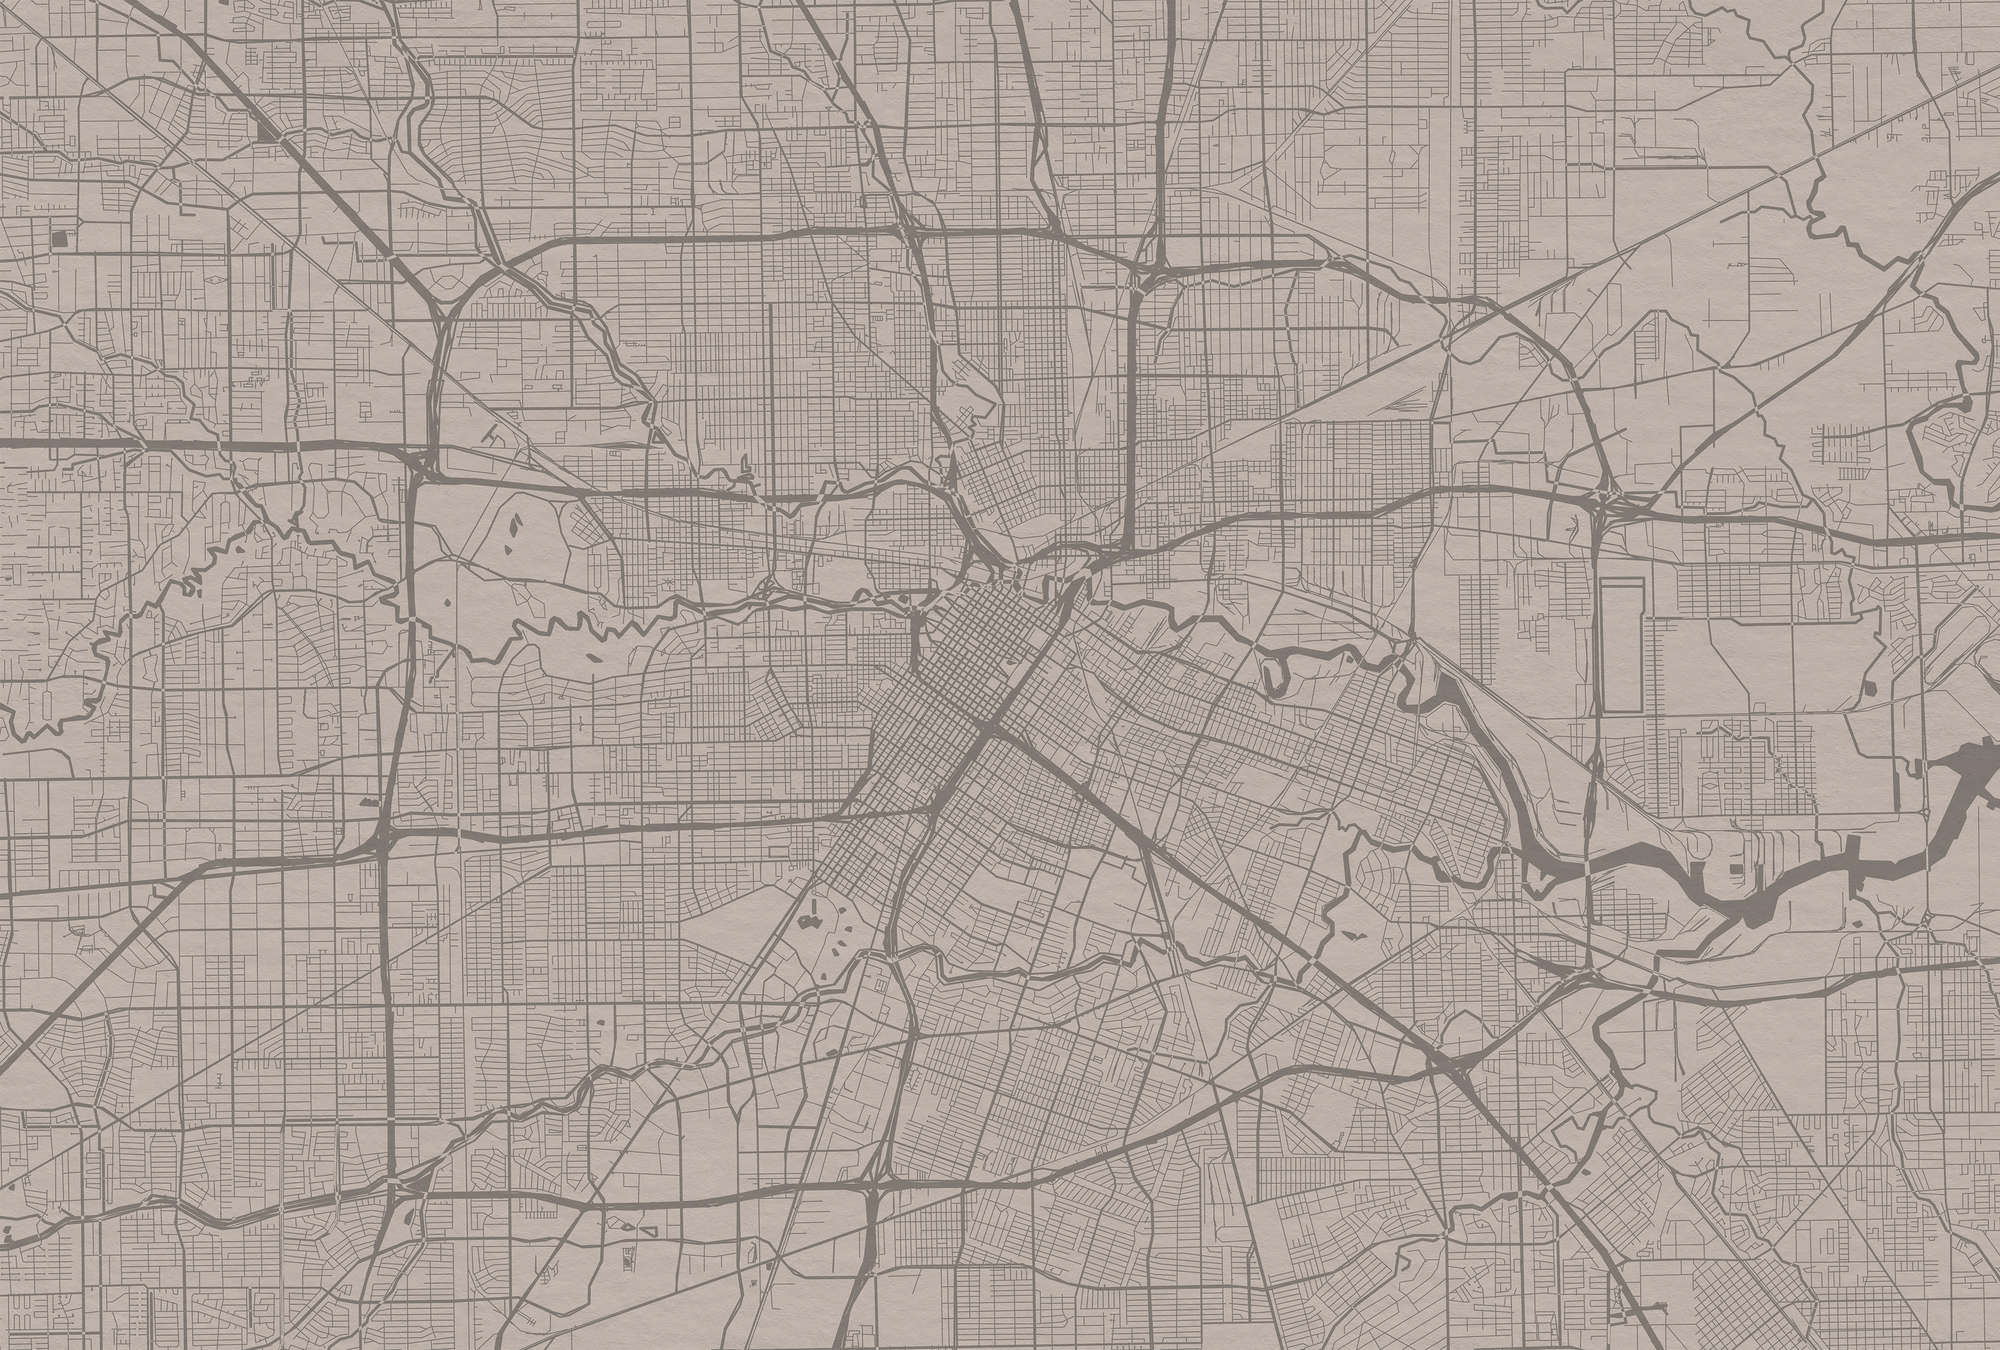             Photo wallpaper city map with street layout - grey
        